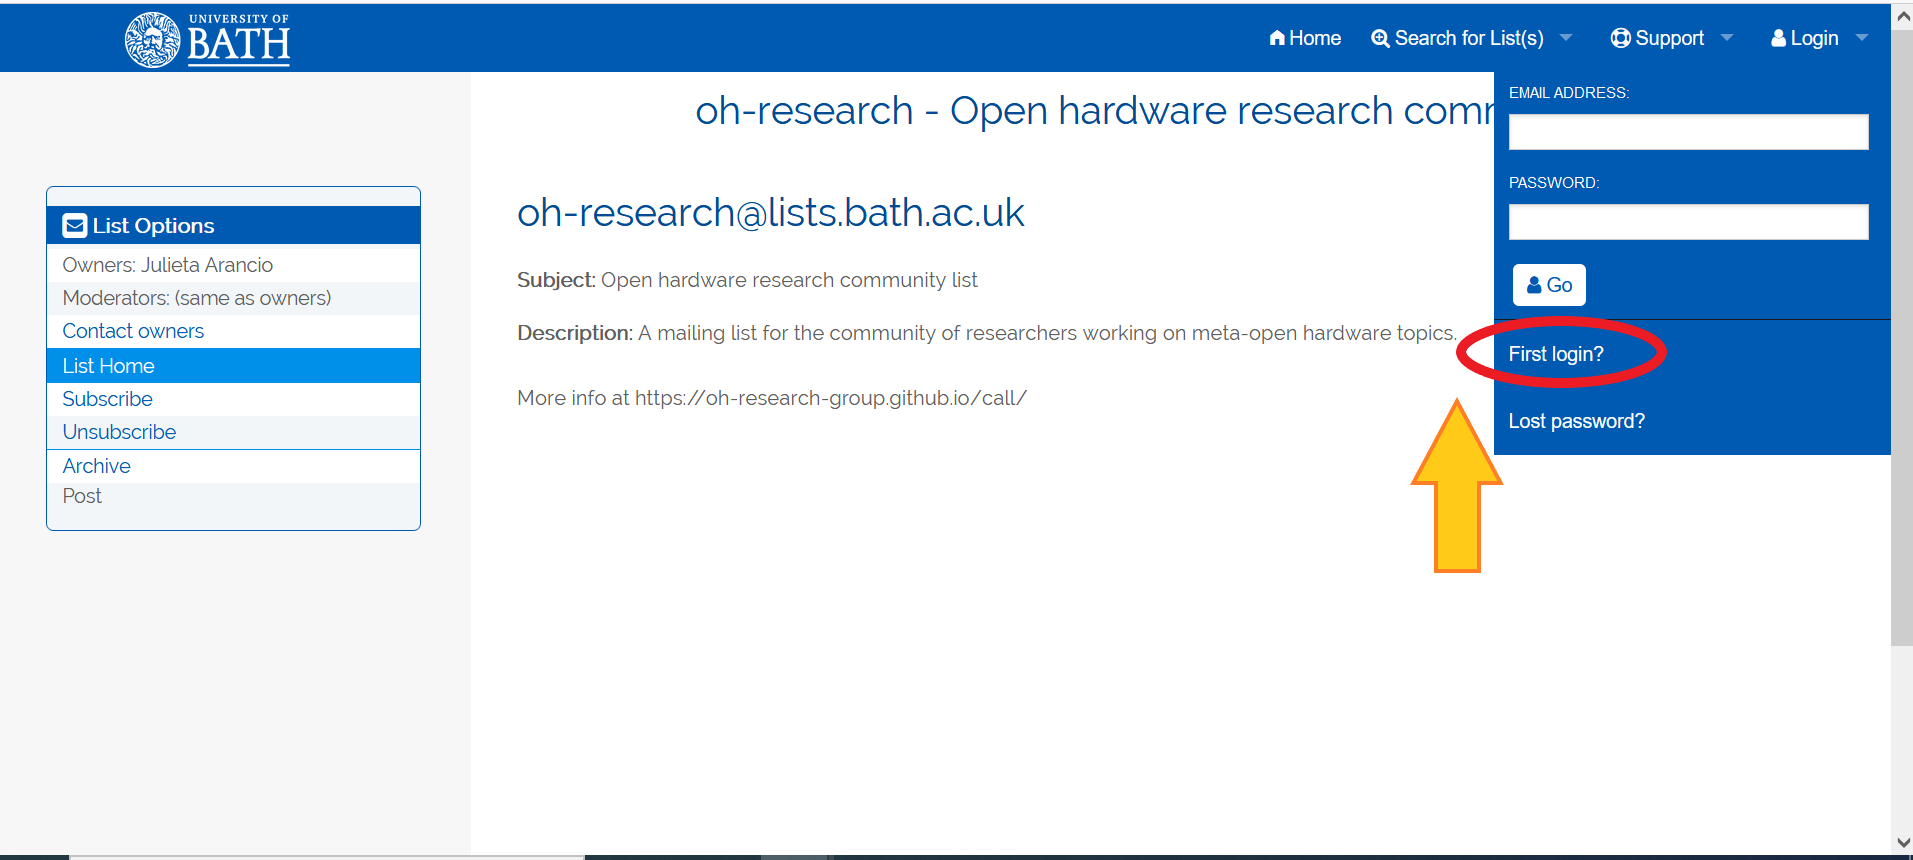 View of the list homepage, highlighting first login option